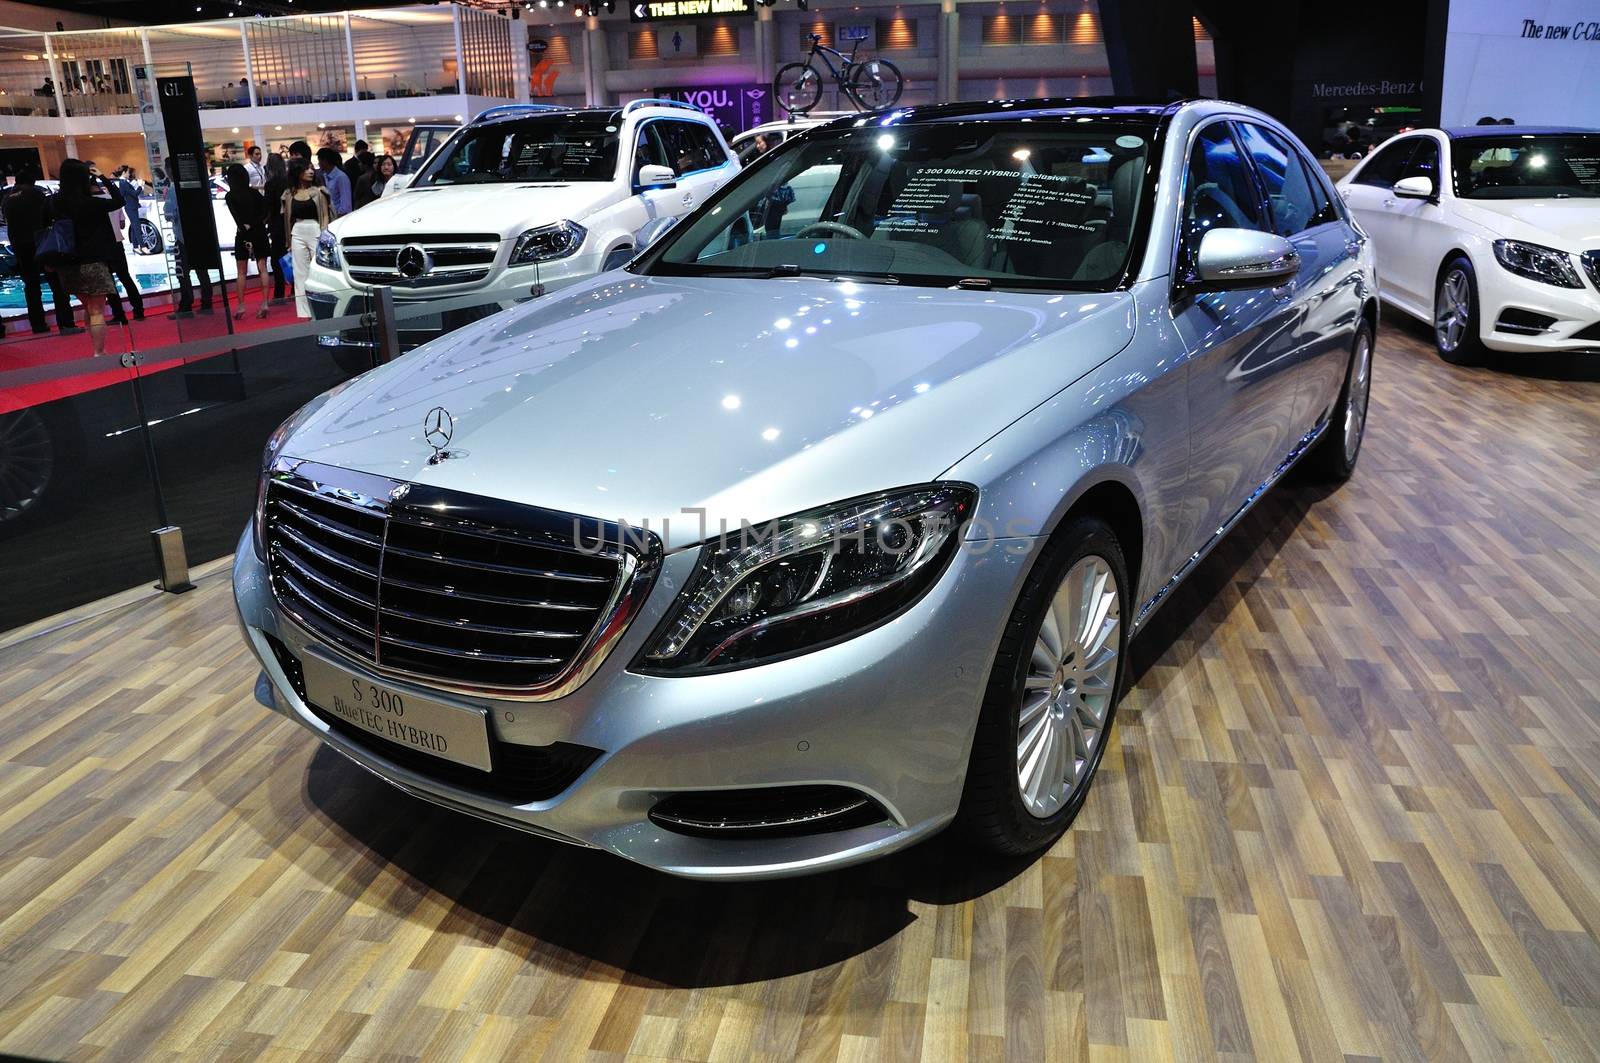 NONTHABURI - March 25: New Mercedes BENZ S300 Bluetec Hybrid on display at The 35th Bangkok International Motor show on March 25, 2014 in Nonthaburi, Thailand.